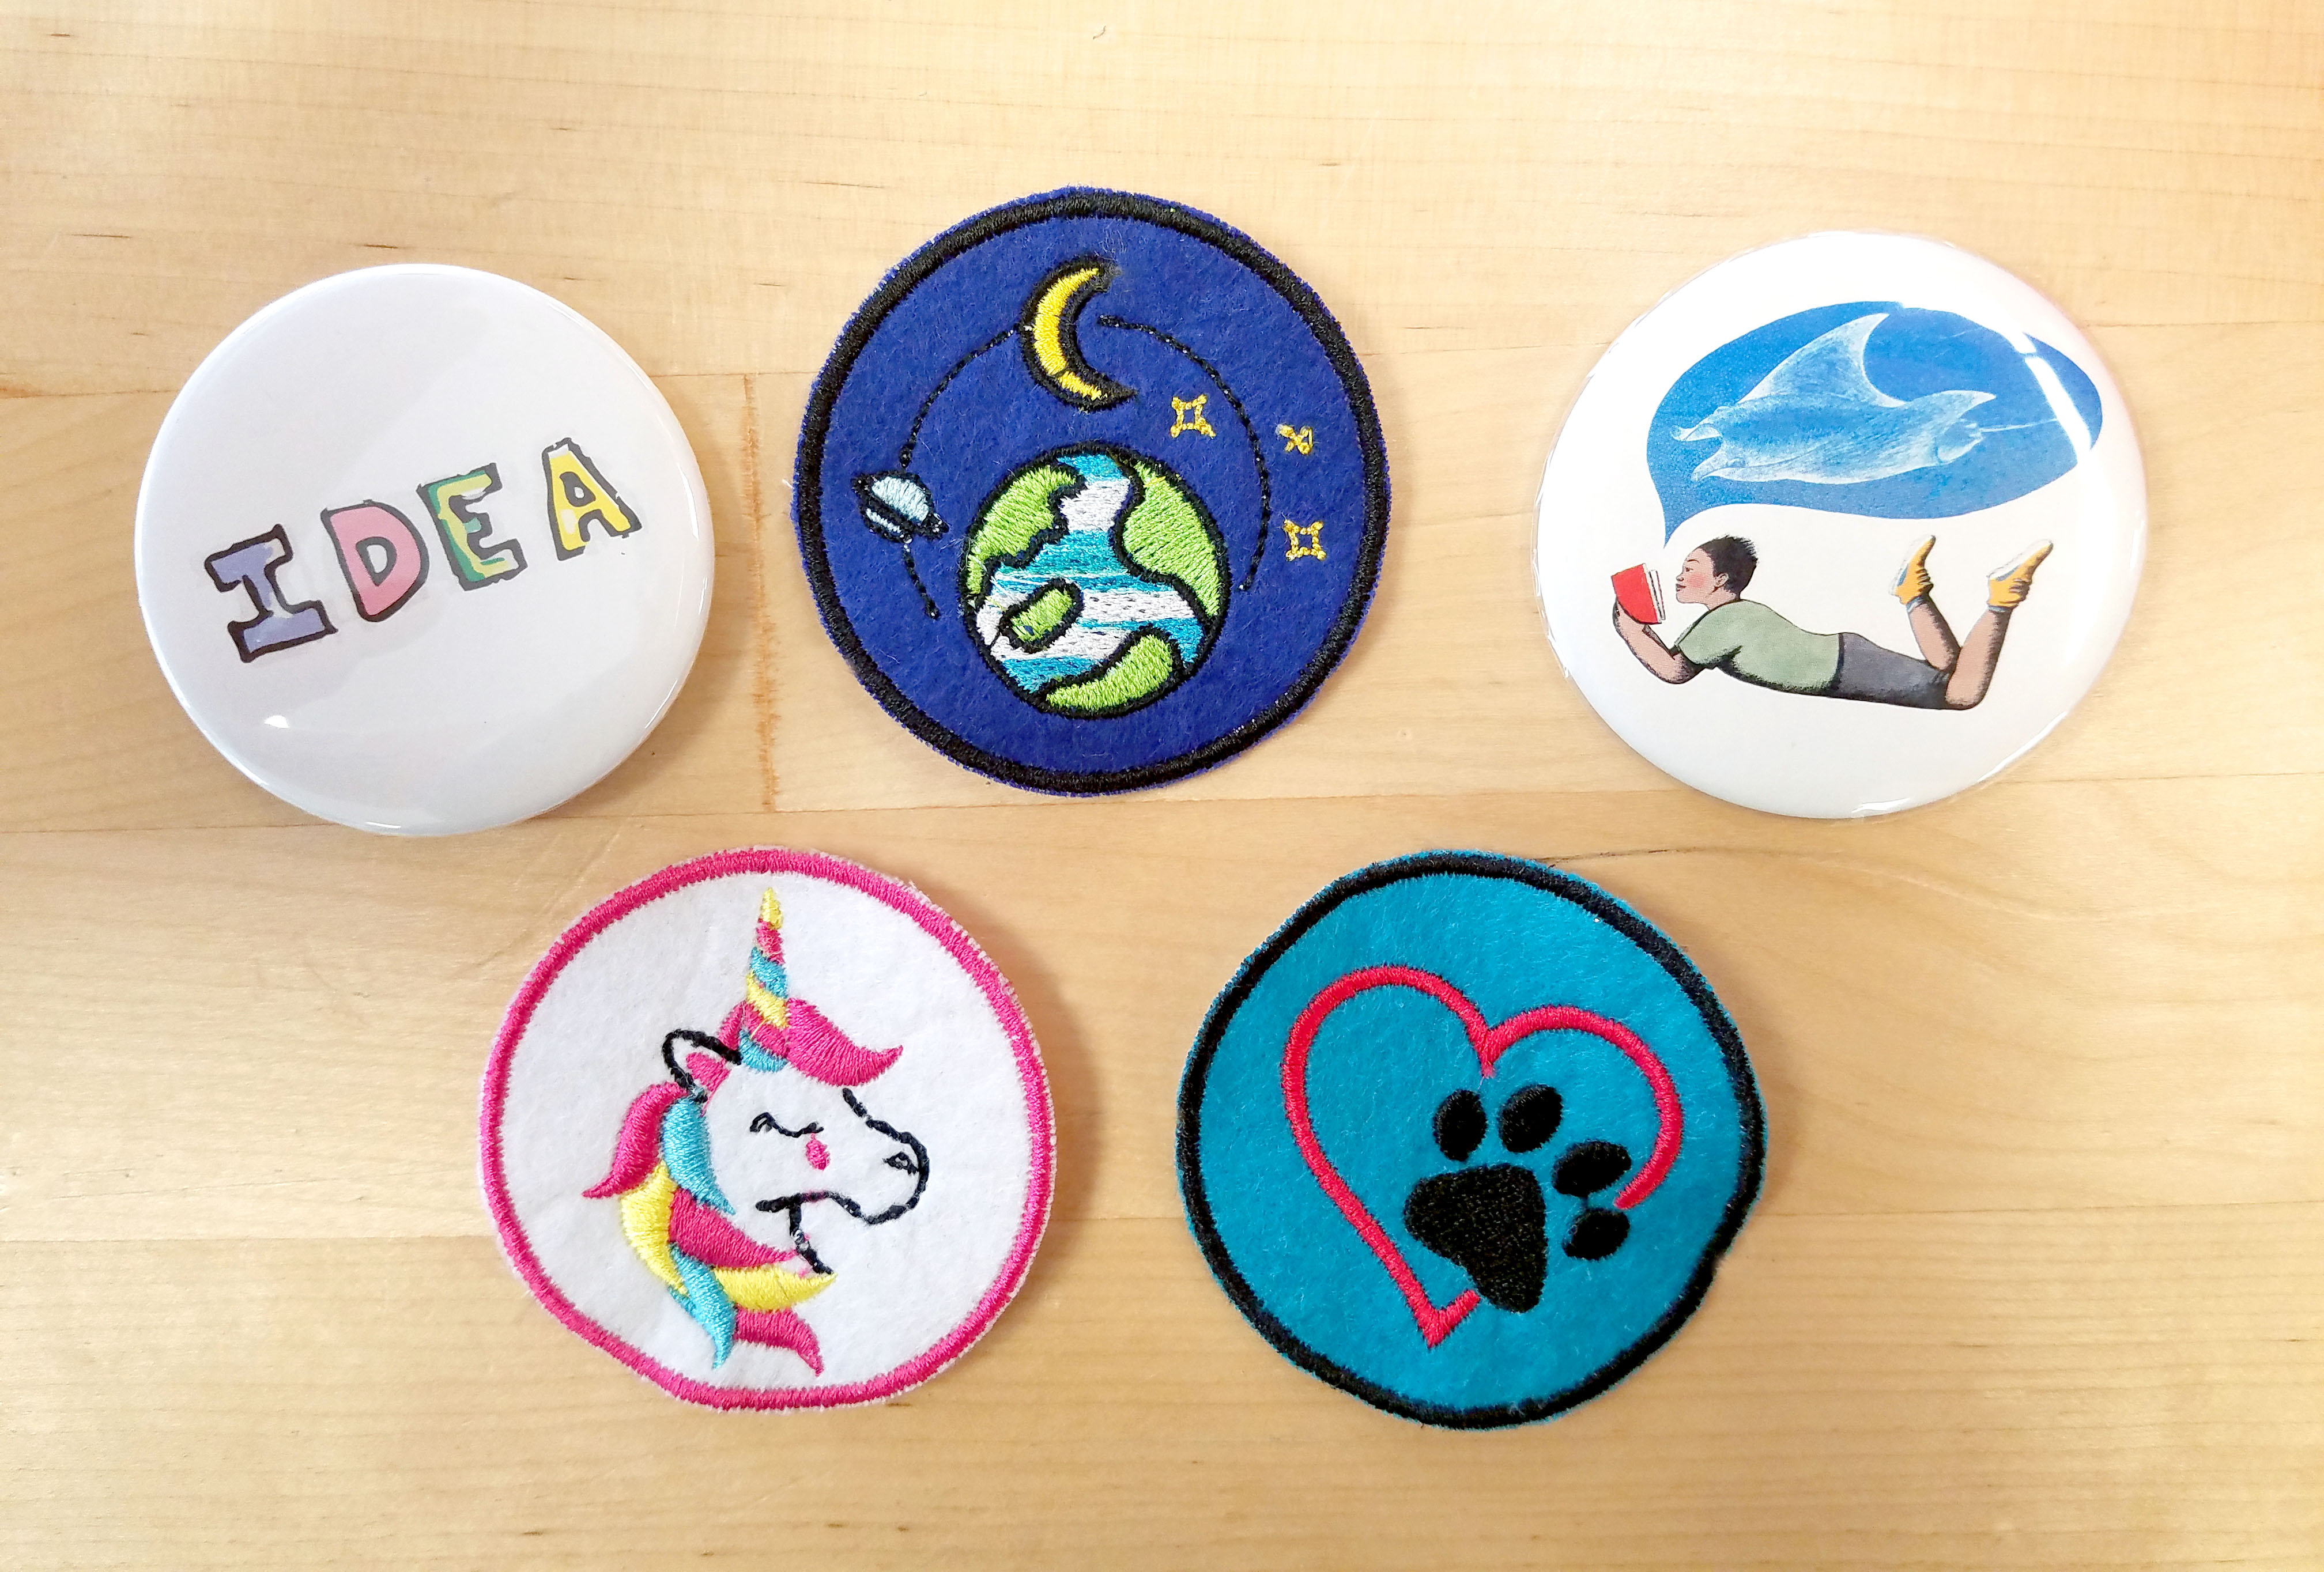 Embroidered patches and custom pins on a table